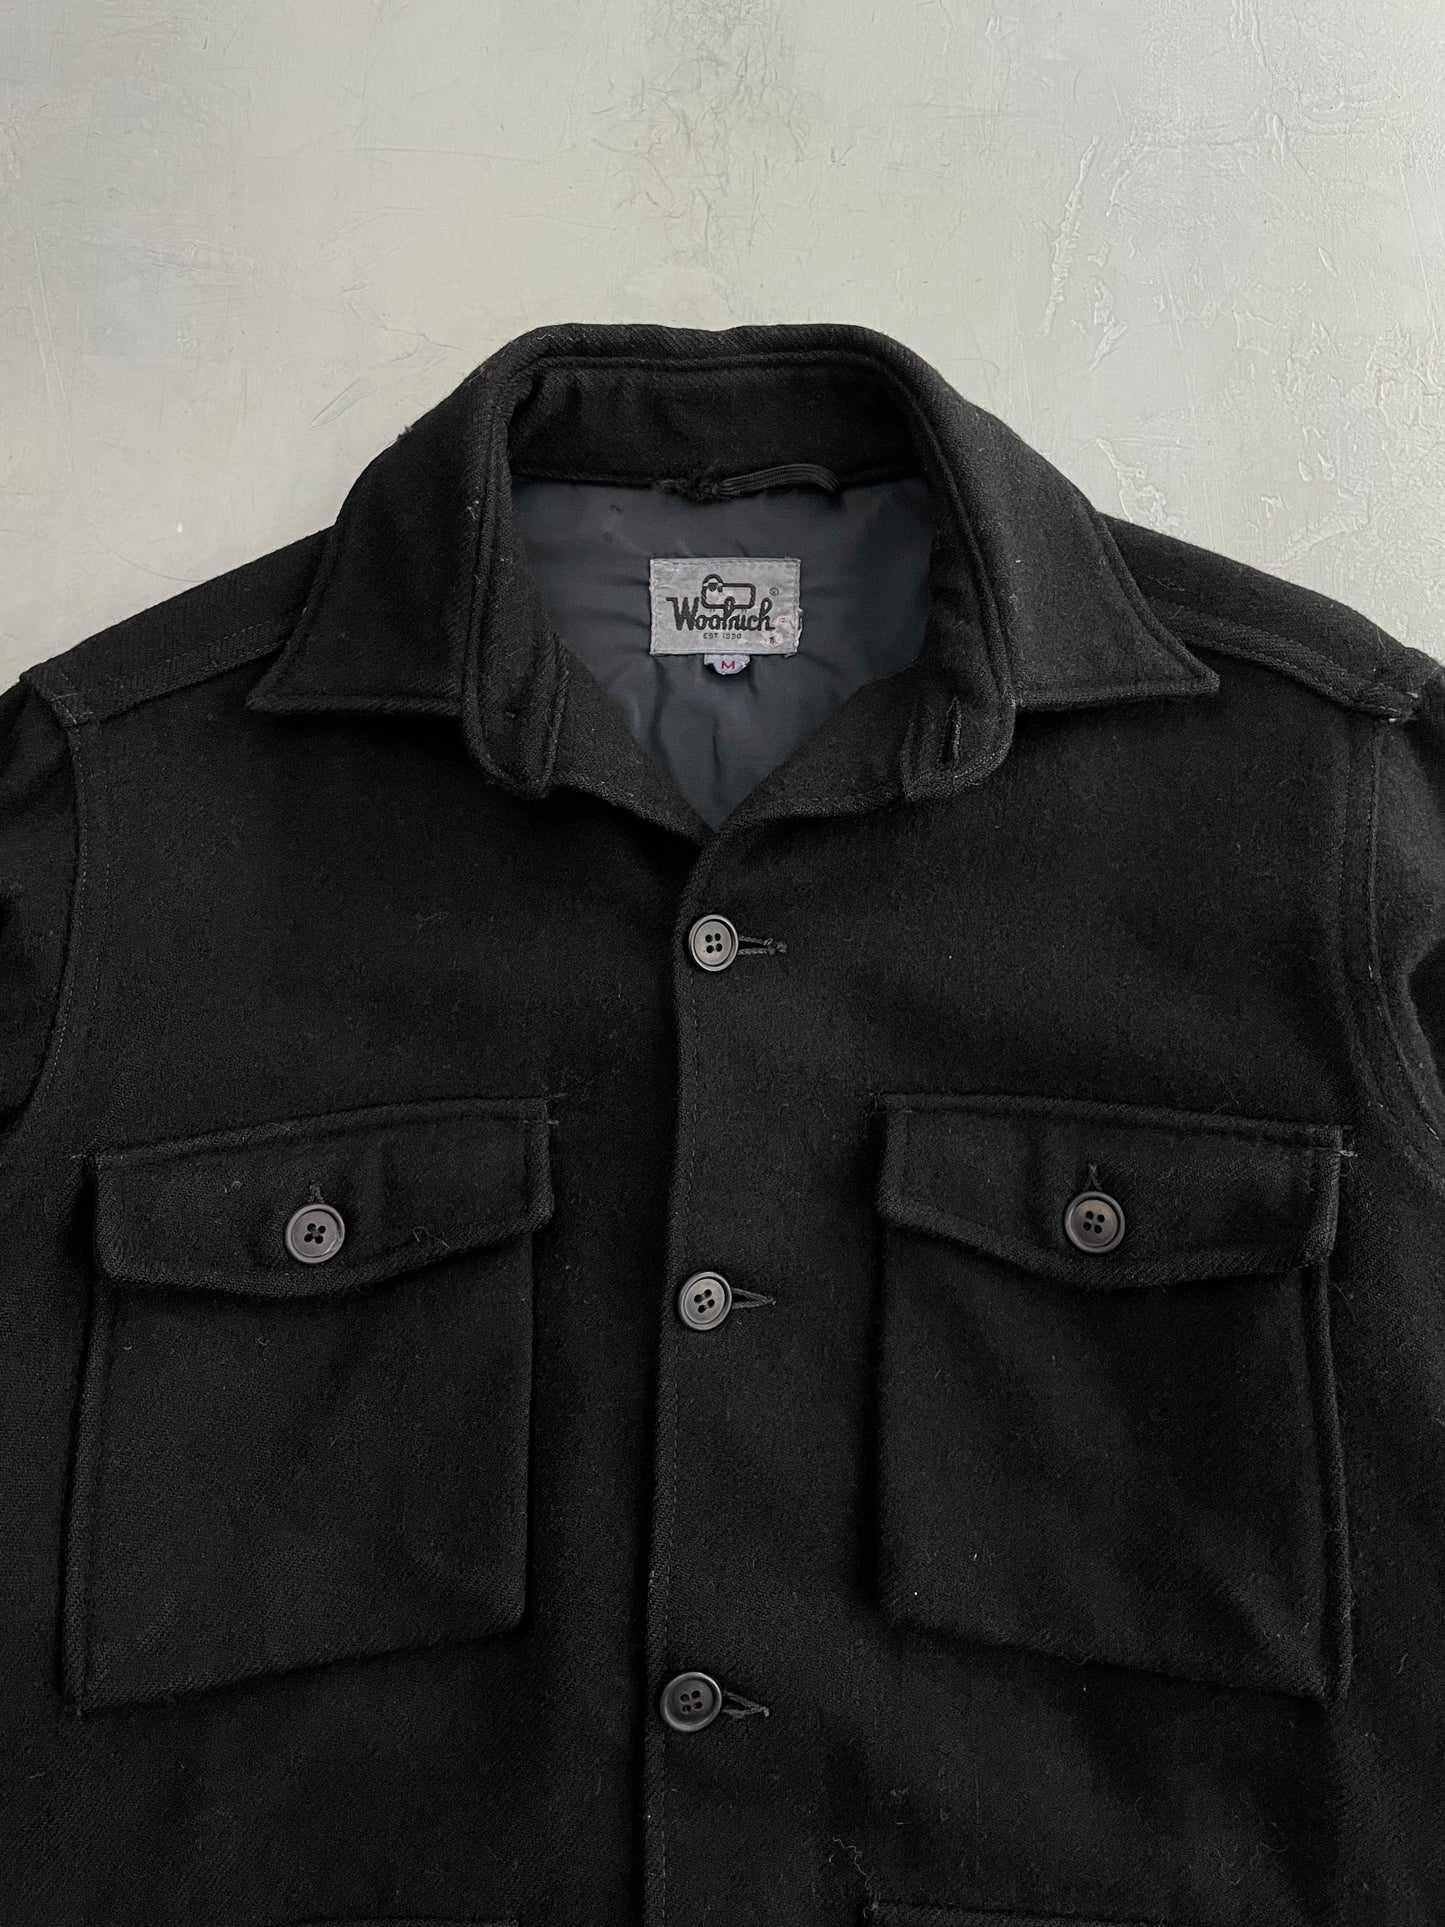 Overdyed Woolrich Hunting Jacket [M]